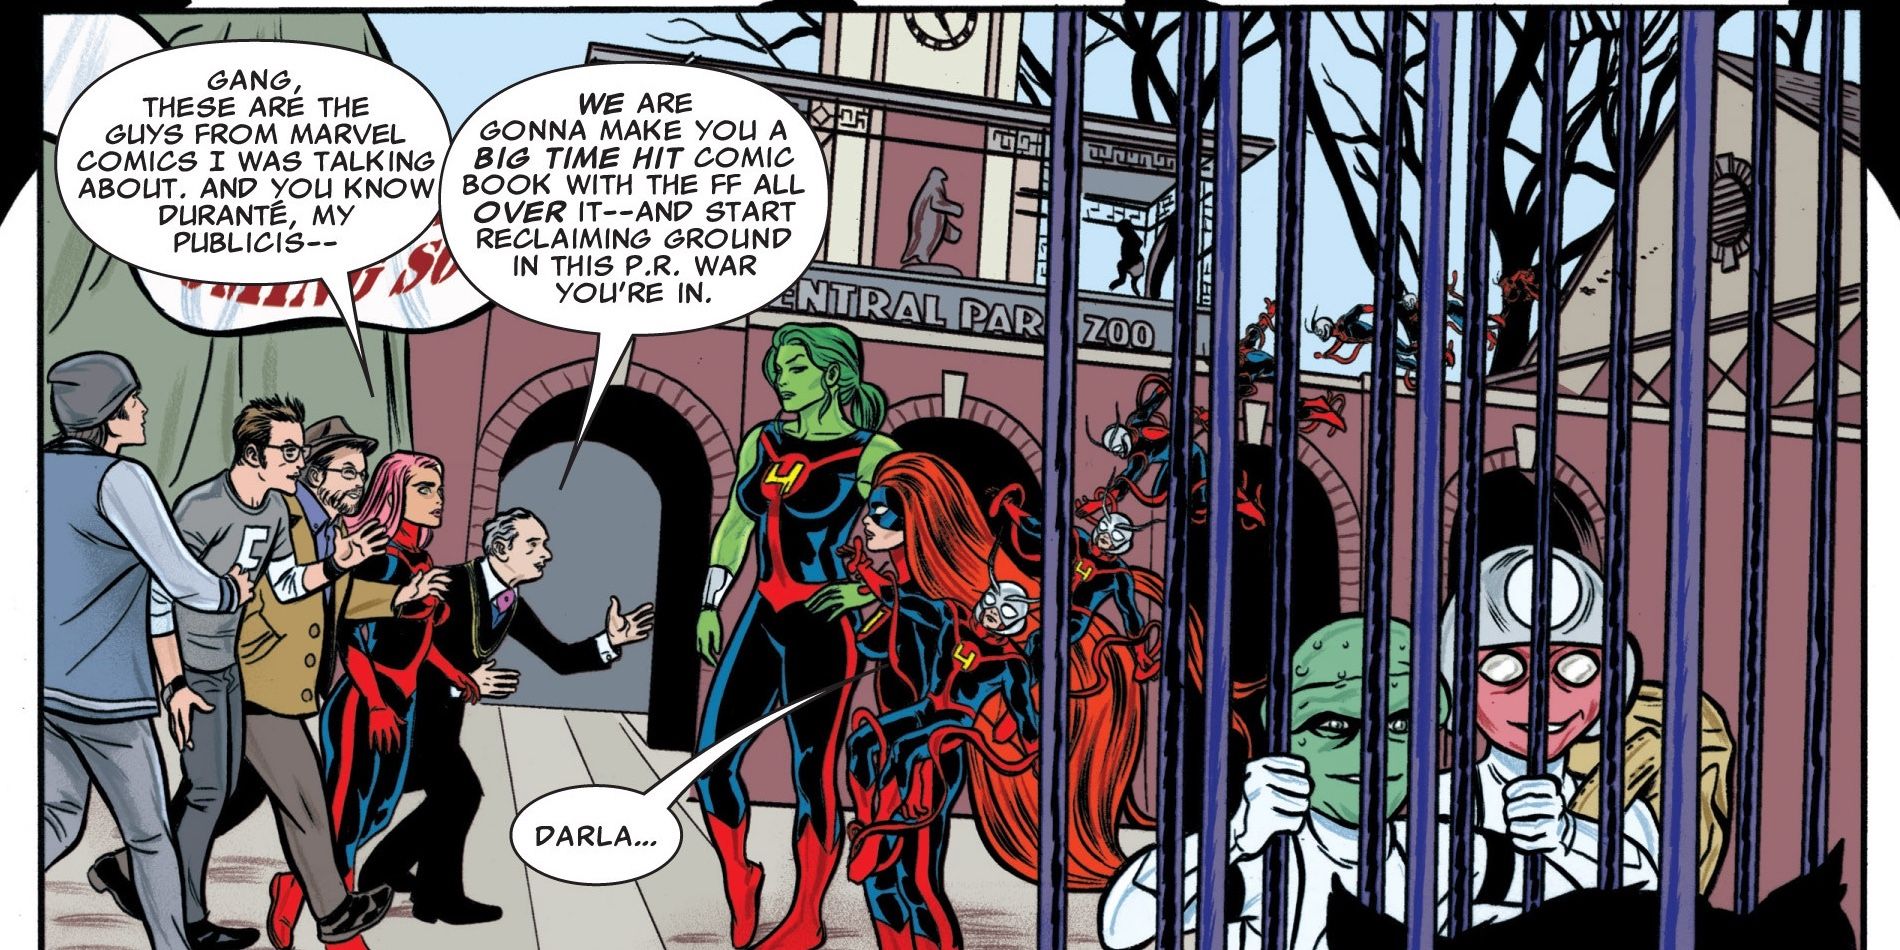 Matt Fraction and Mike Allred appear in their Marvel comic, FF